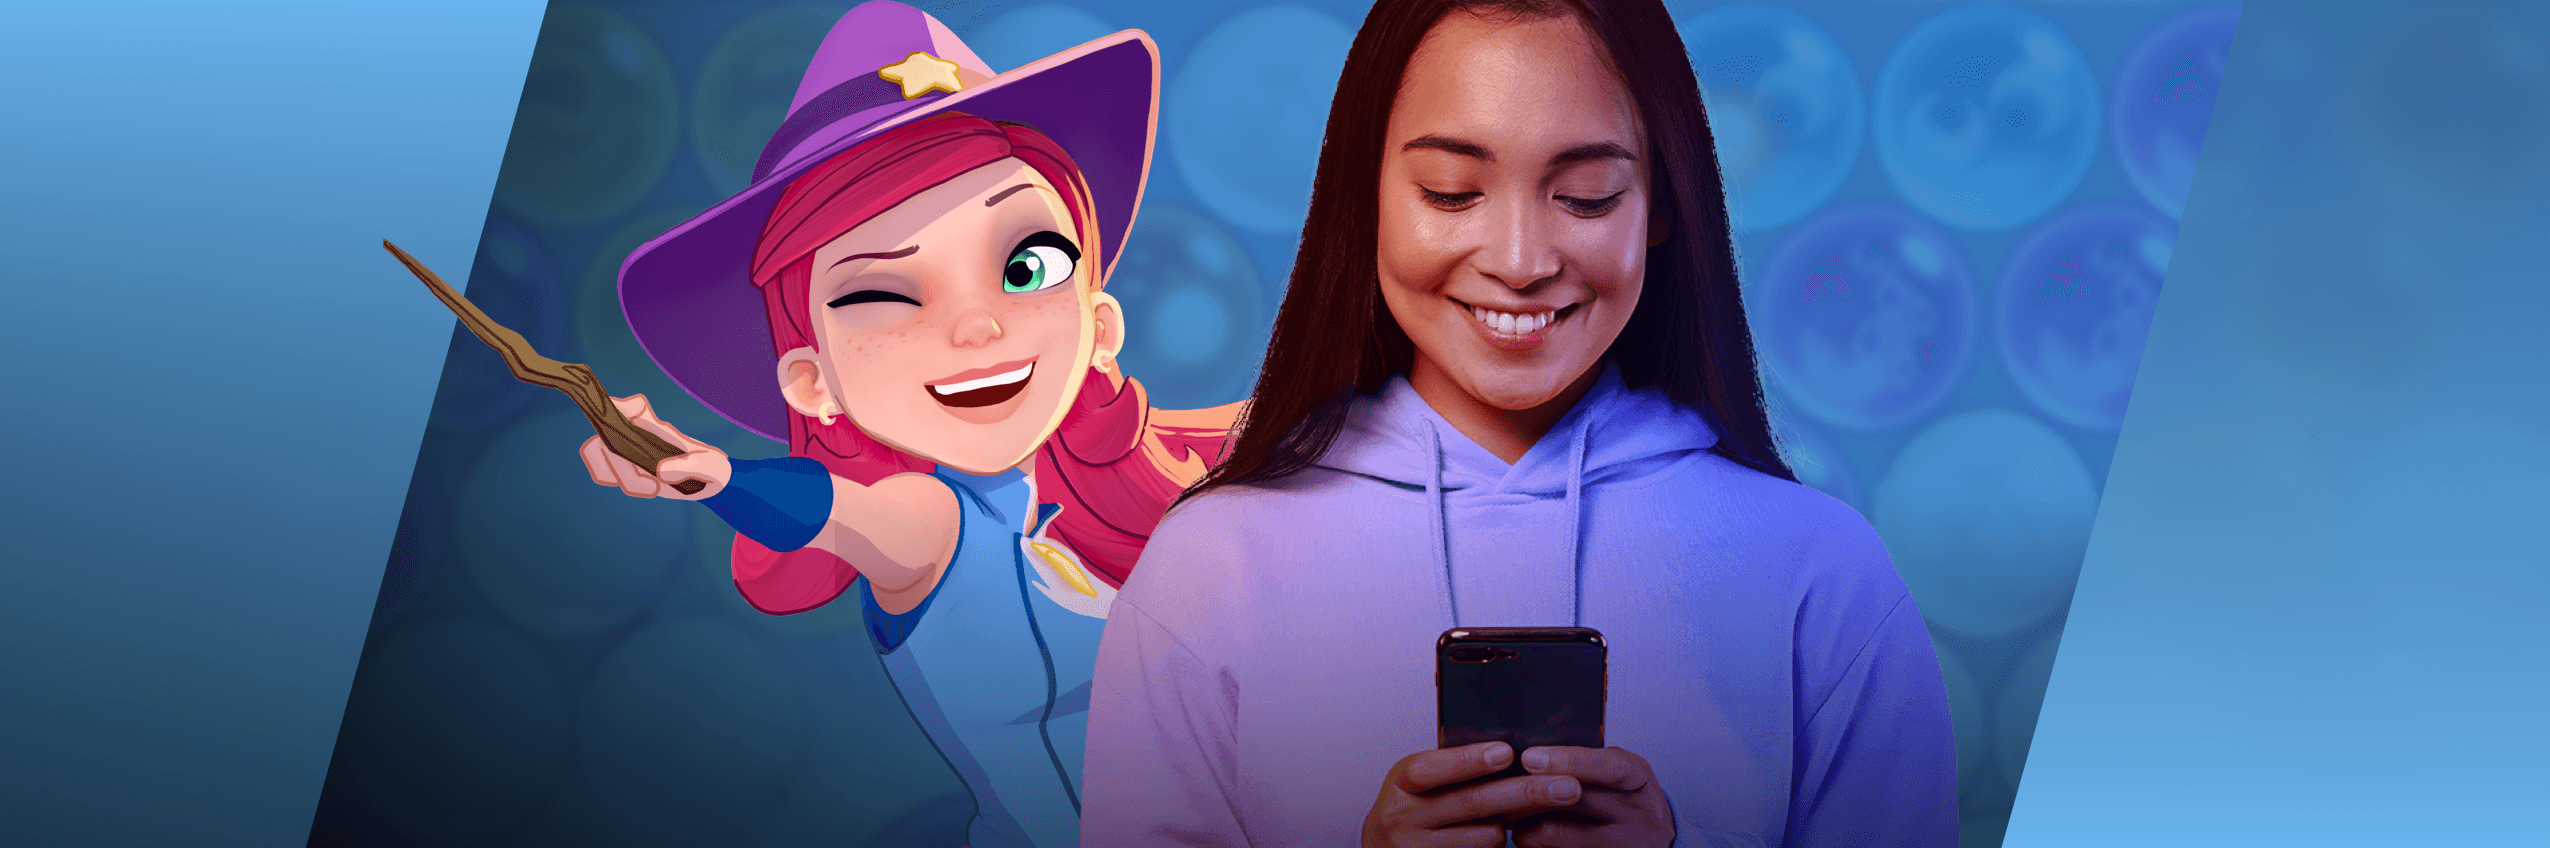 Stella, The Bubble Witch, posed with a young woman playing mobile games.